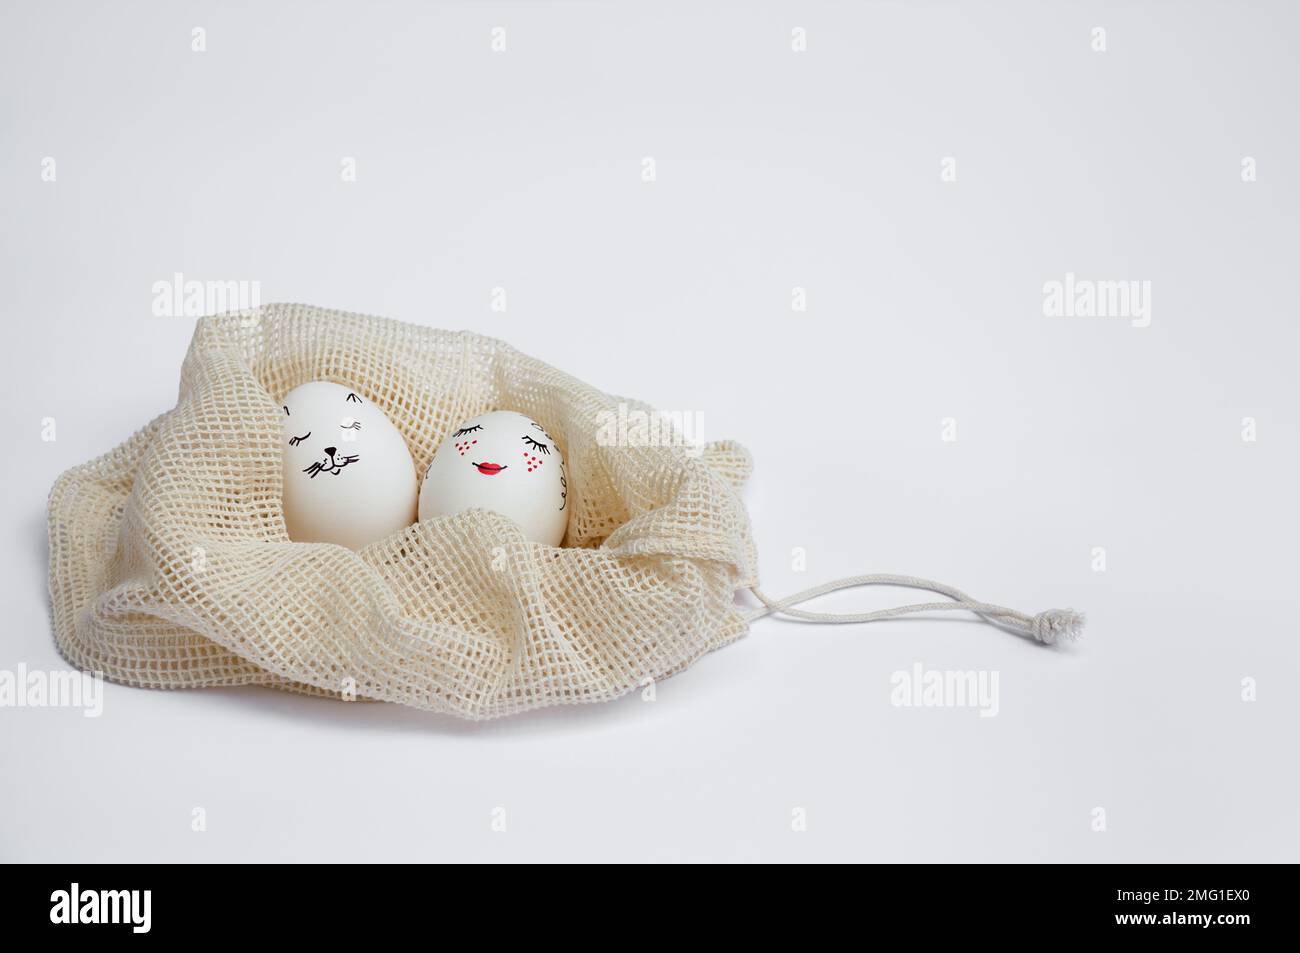 Beautifully painted Easter eggs lie in eco-friendly drawstring mesh bag on white table. Funny spades painted on eggs. Copy space. Happy holidays Stock Photo